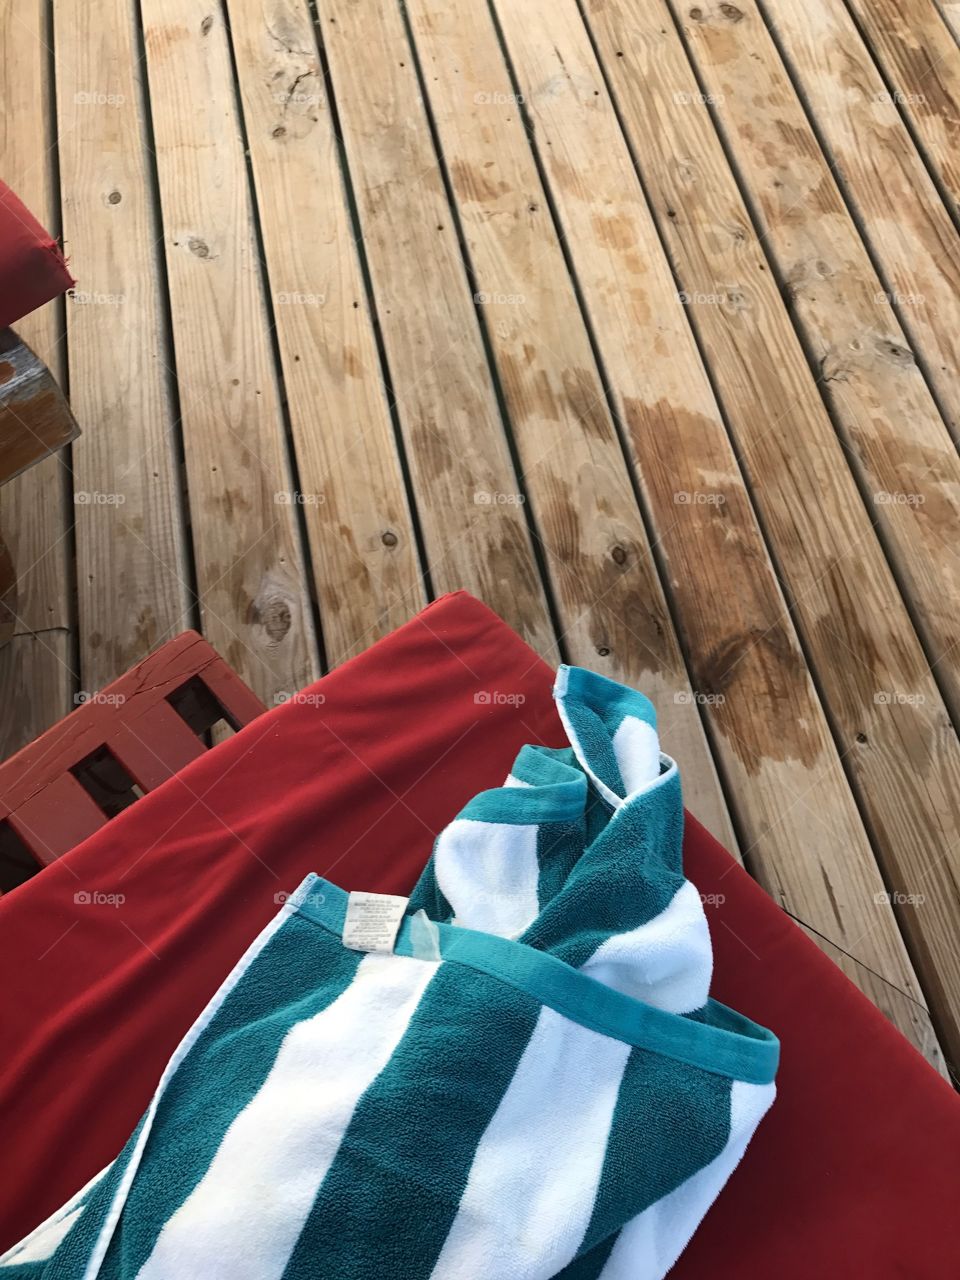 Summer towel and dock
